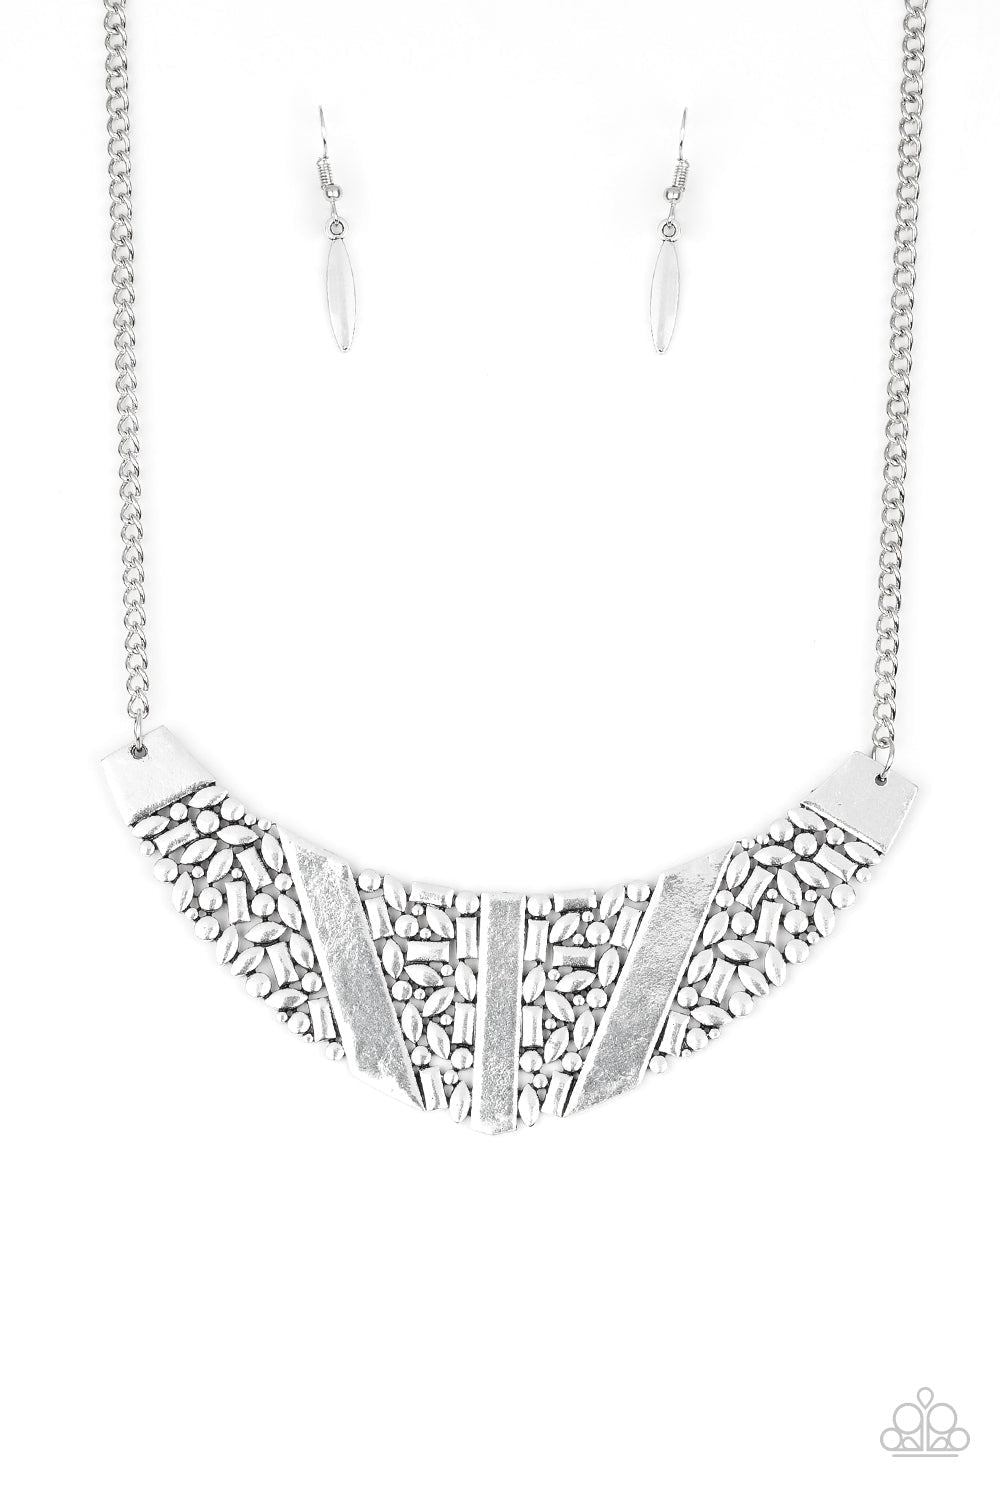 Terra Trailbreaker Silver Necklace - Paparazzi Accessories- lightbox - CarasShop.com - $5 Jewelry by Cara Jewels